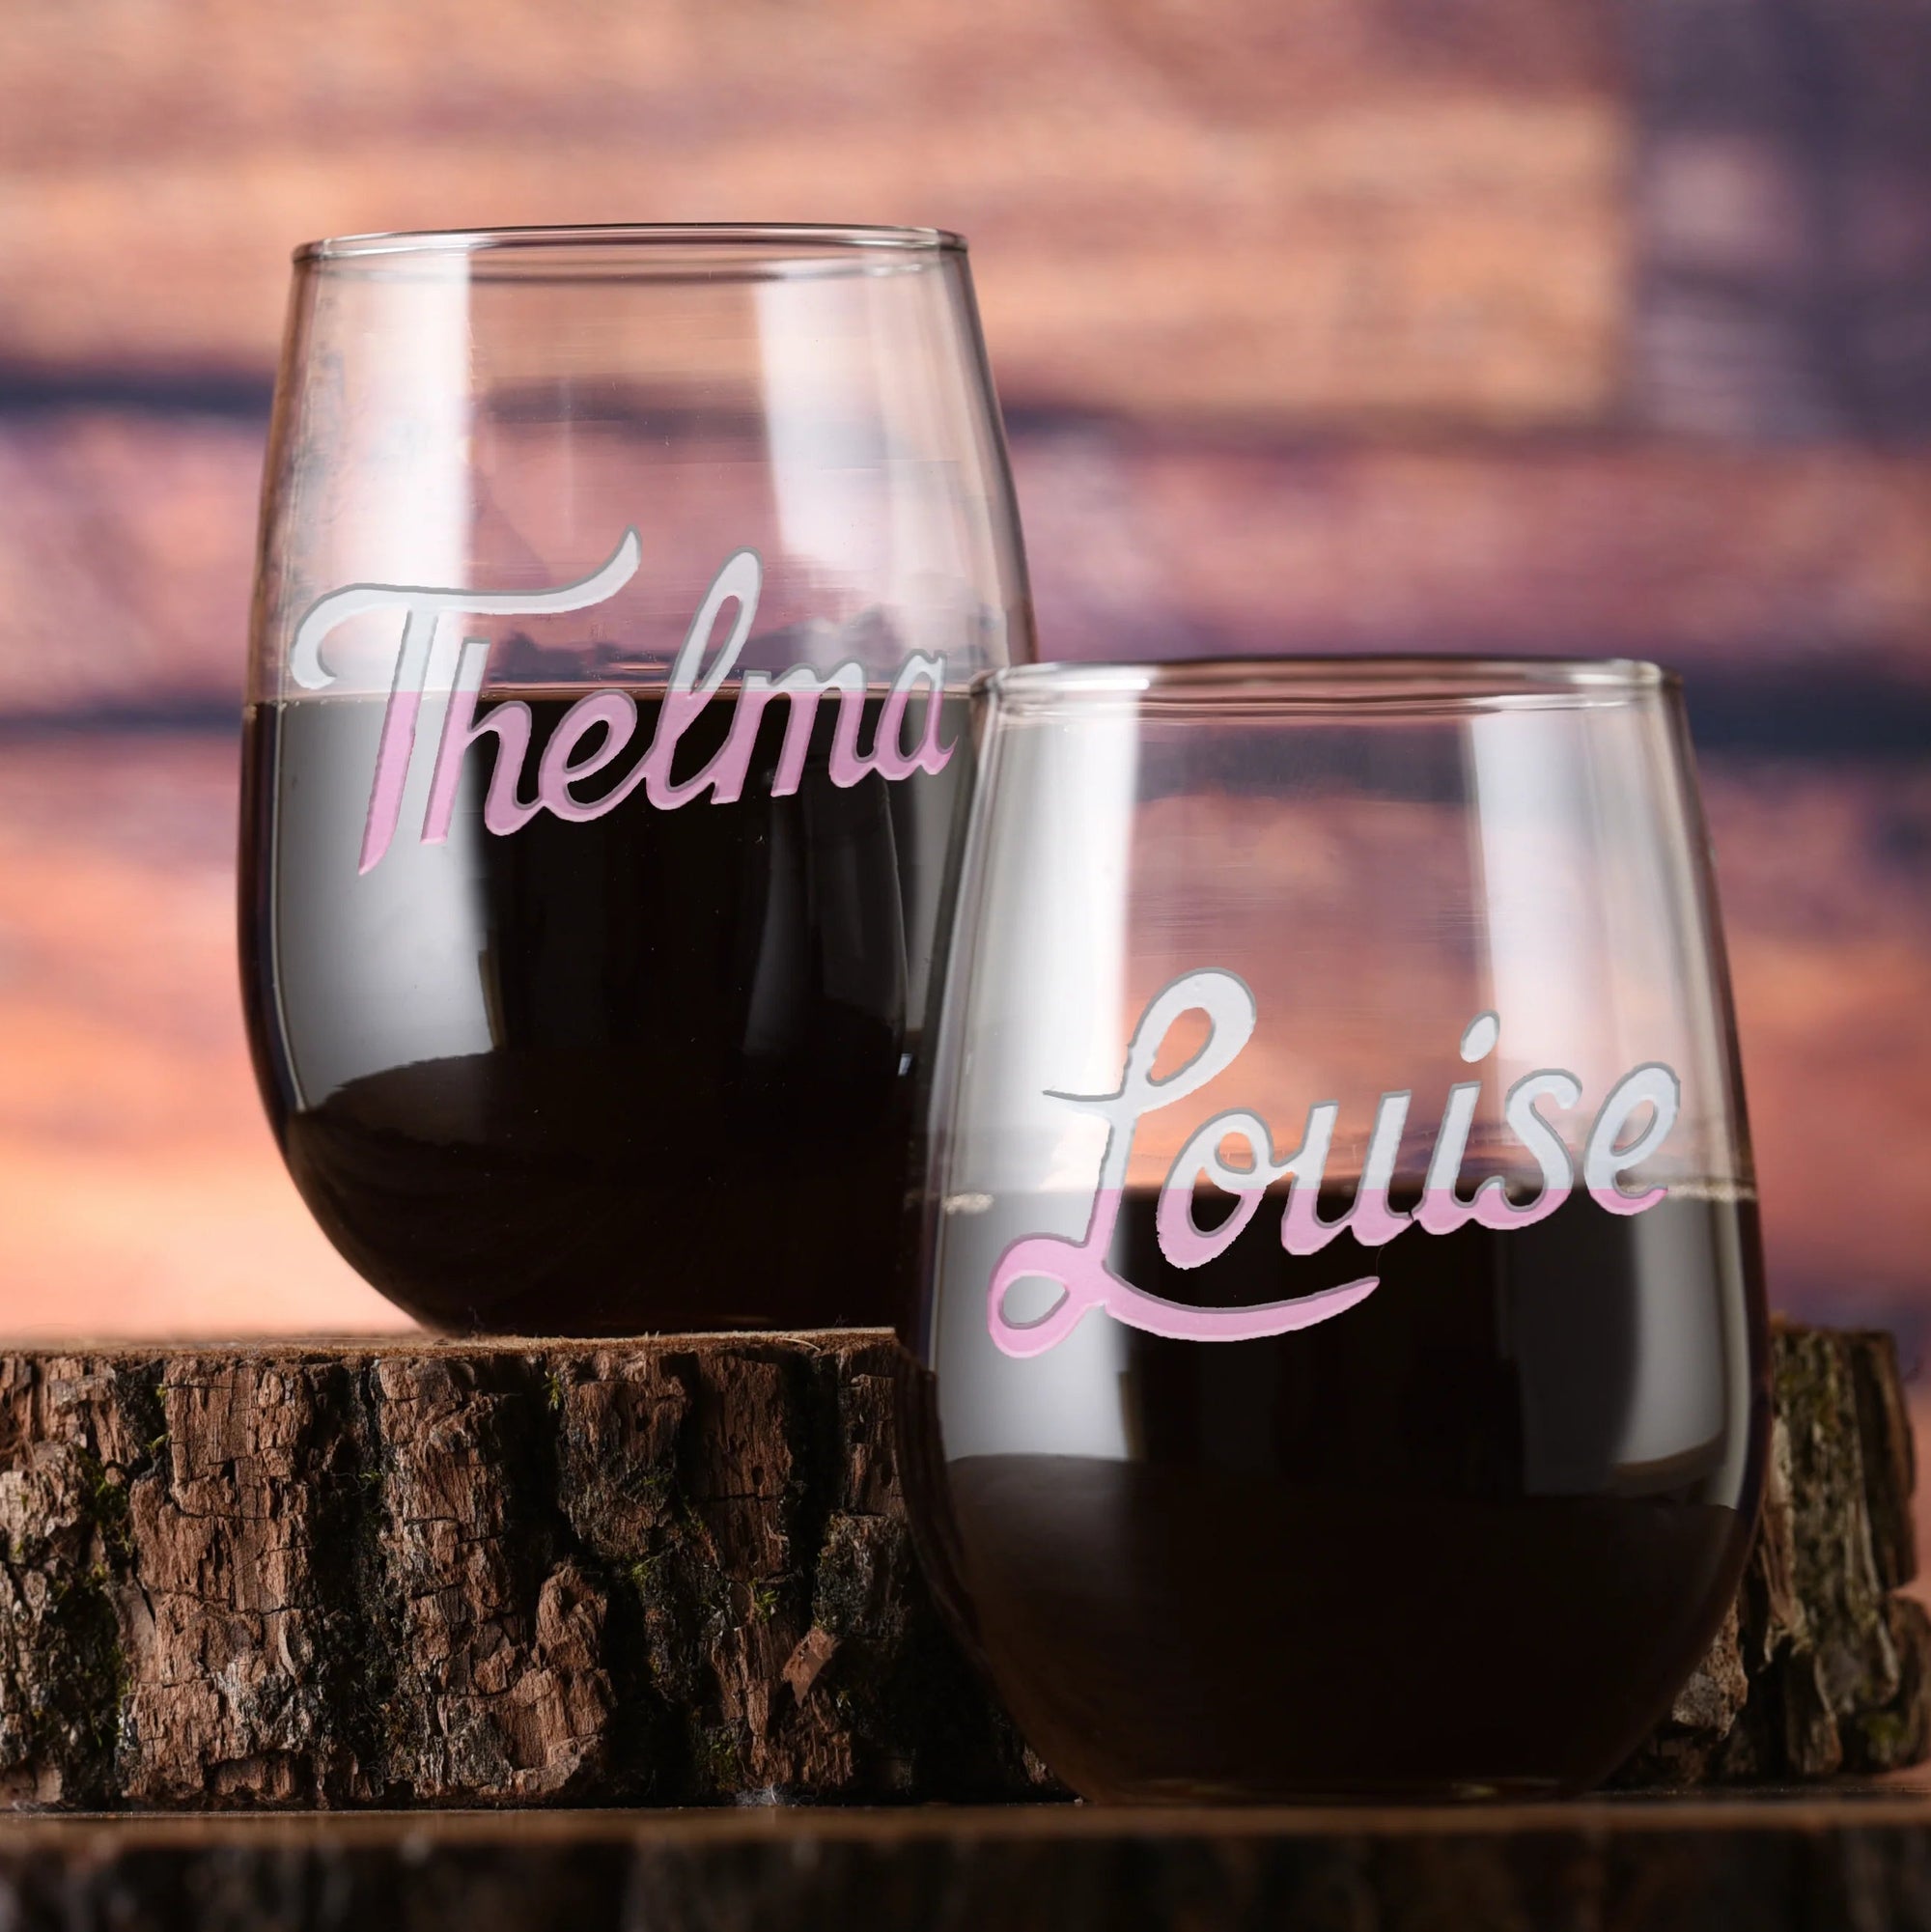 https://cdn.shopify.com/s/files/1/0506/7757/9968/products/thelma-and-louise-wine-glass-set-493096_2000x.webp?v=1683467991